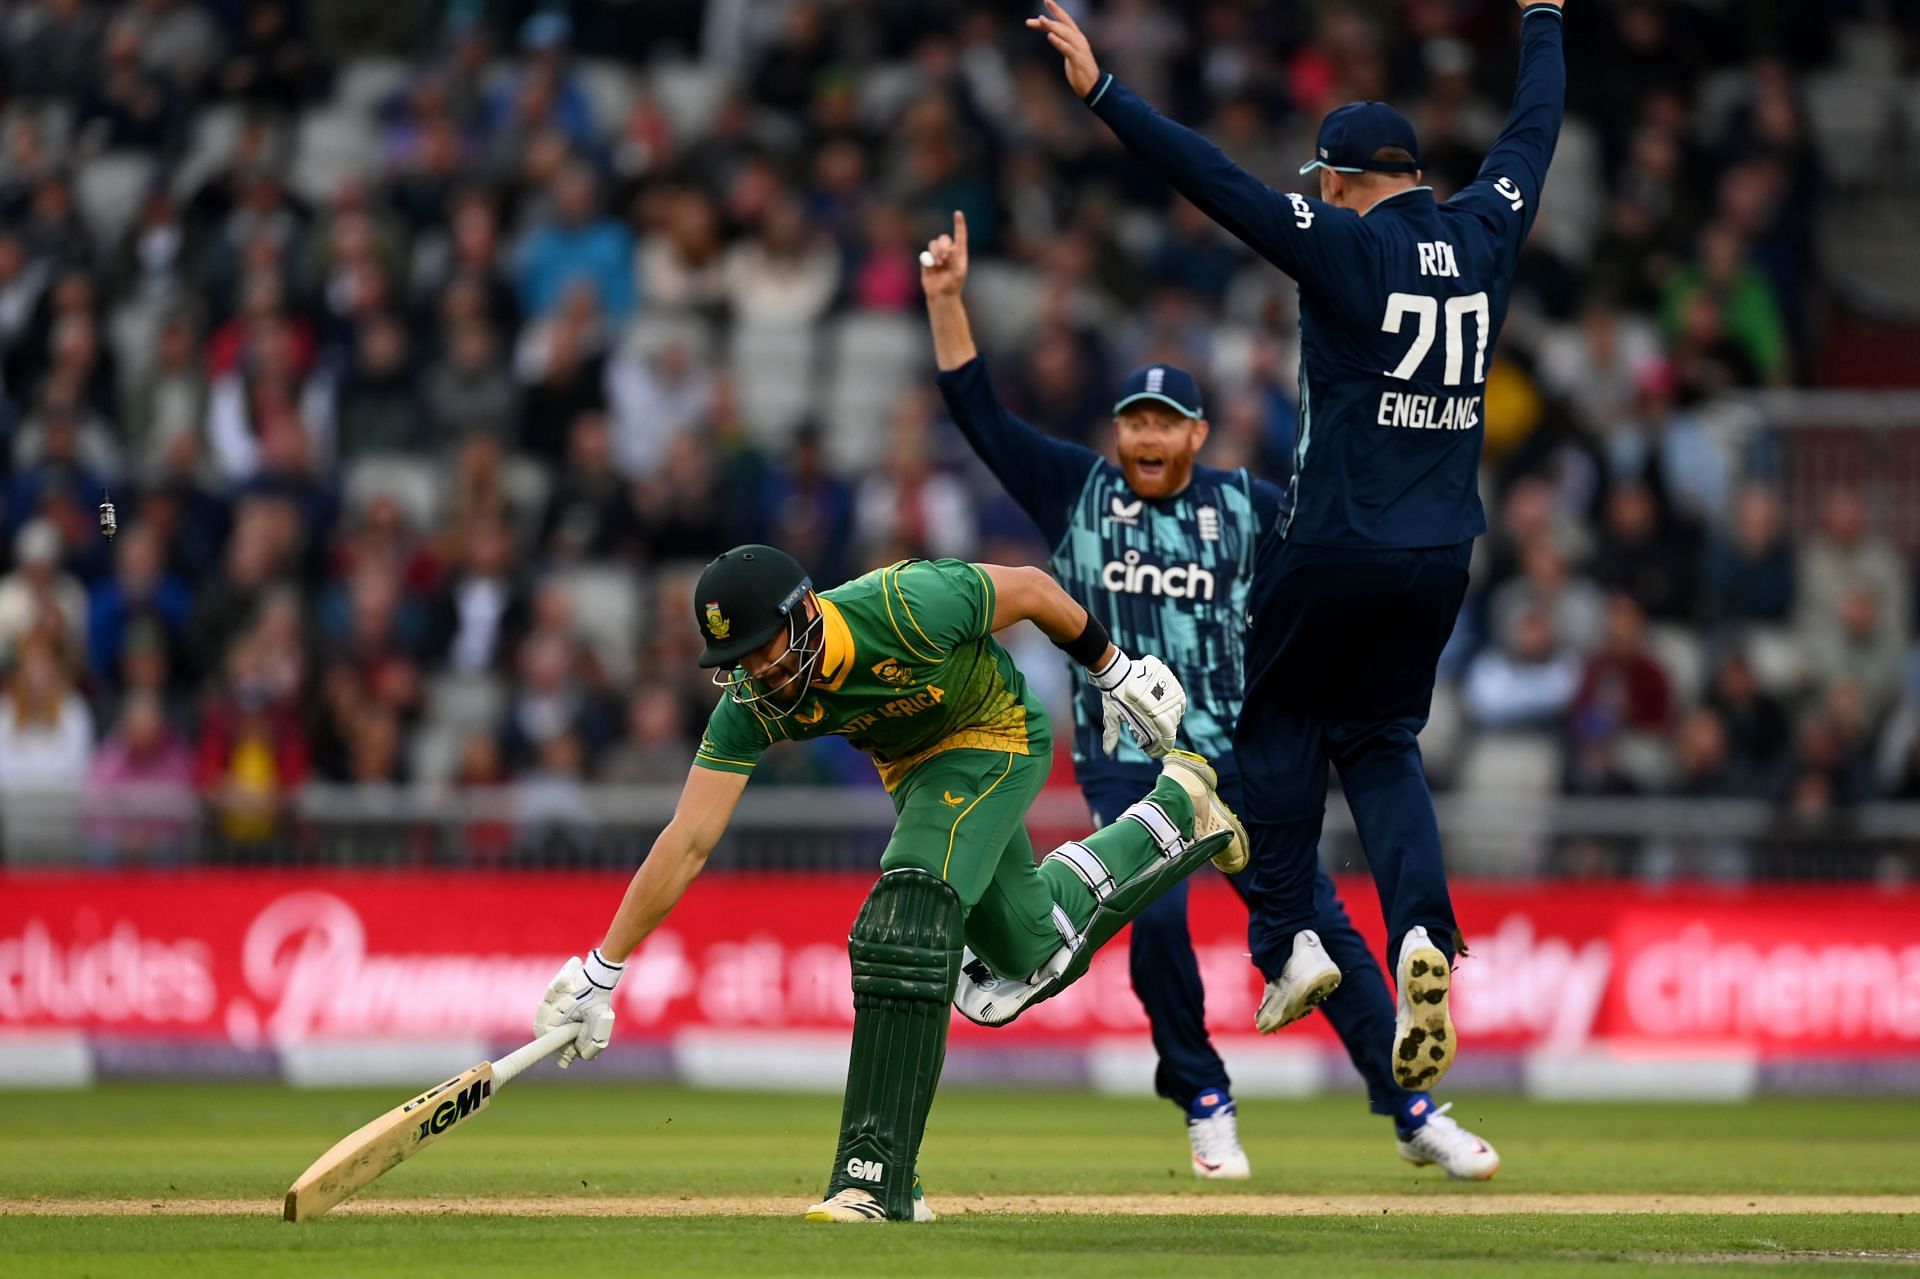 England v South Africa - 2nd Royal London Series One Day International (Image courtesy: Getty)